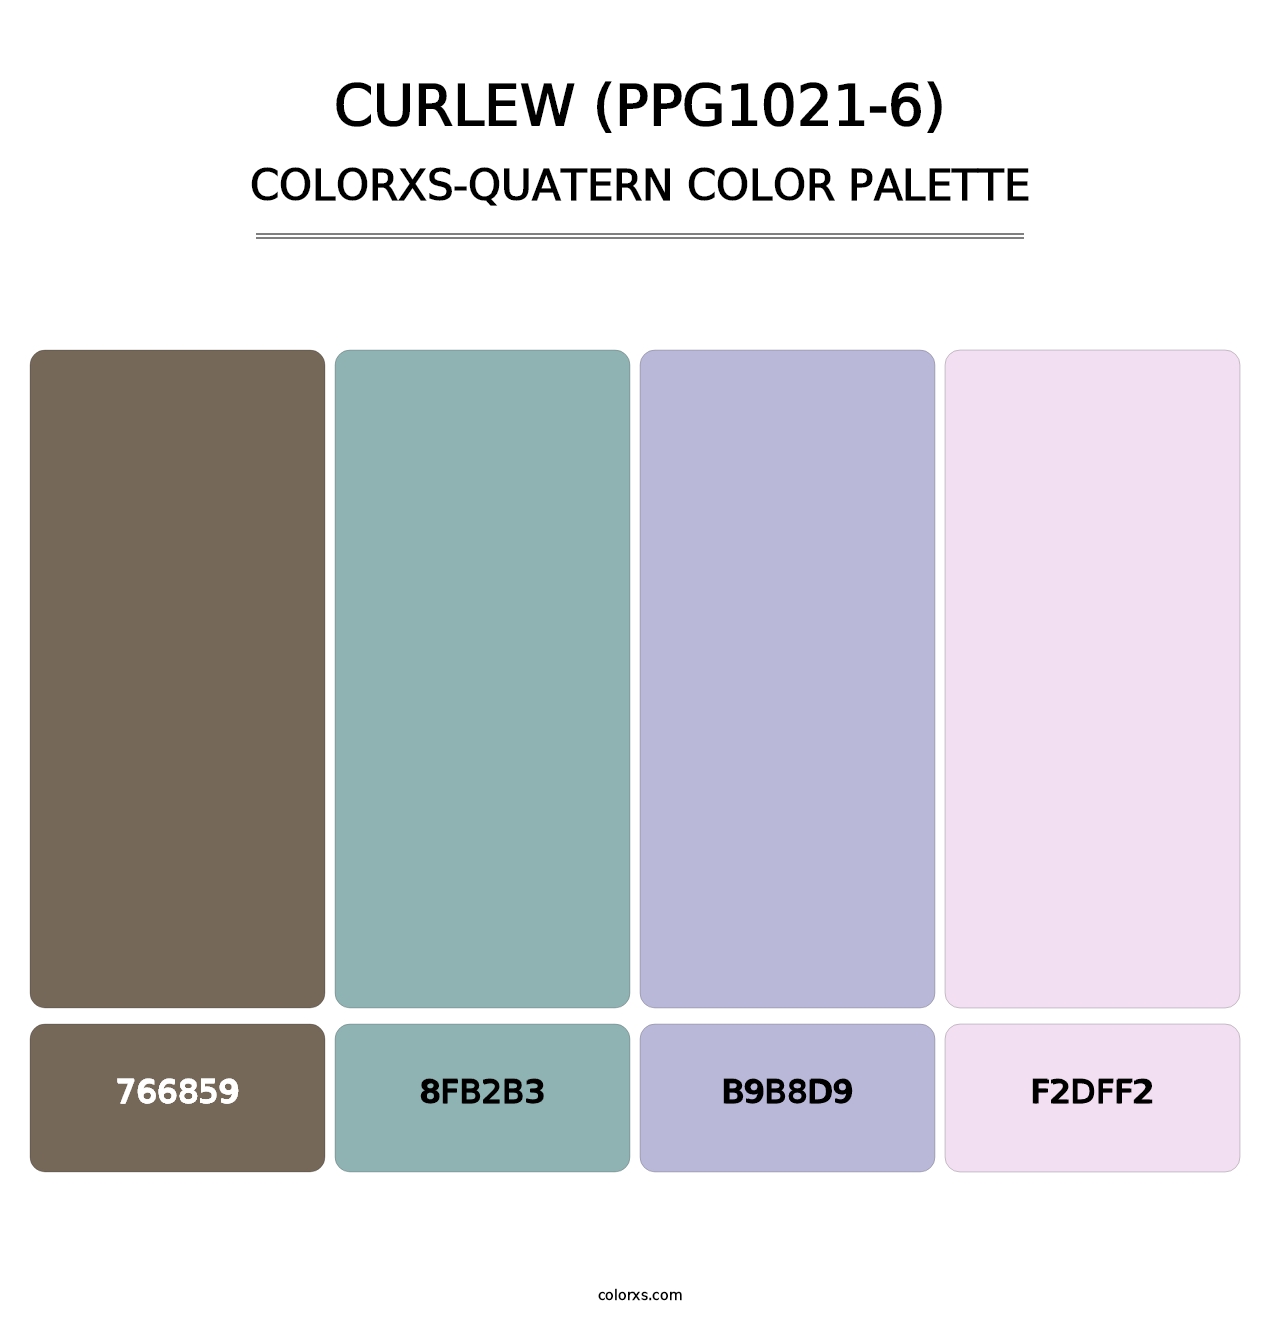 Curlew (PPG1021-6) - Colorxs Quatern Palette